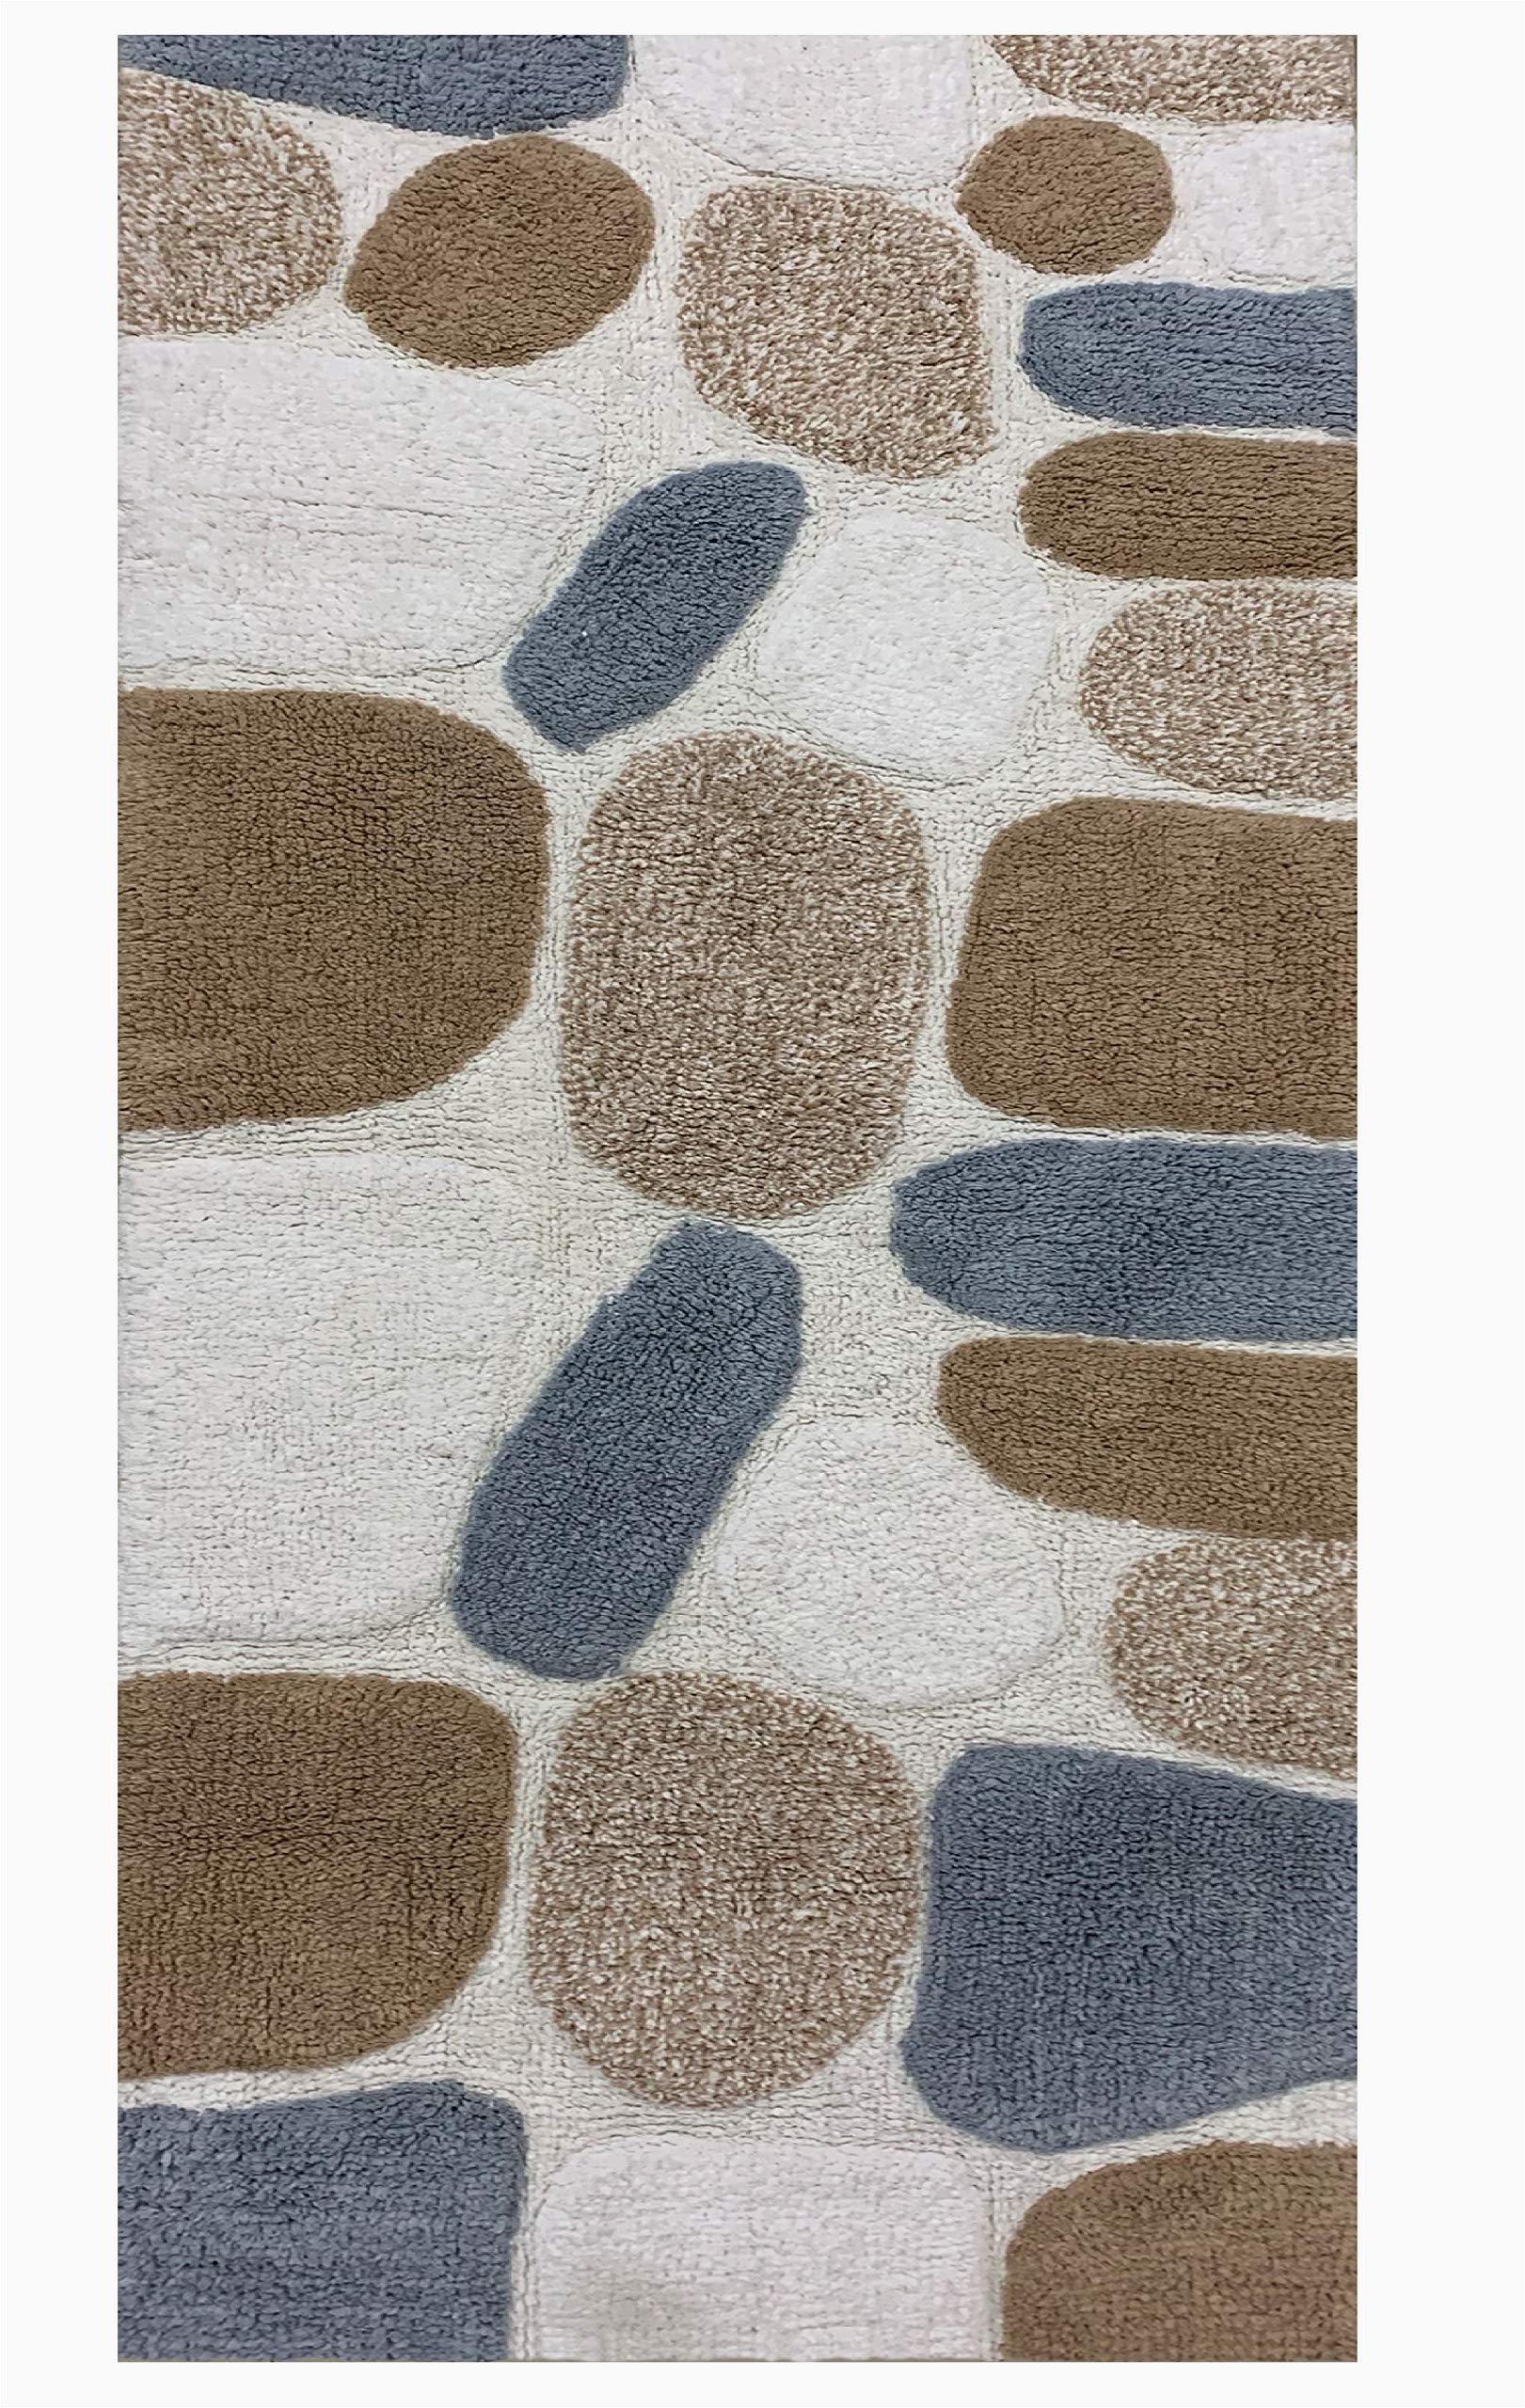 Grey and Beige Bathroom Rugs Cotton Pebbles Cotton Bath Runner 24×60 Bath Rug soft Absorbent Machine Washable Grey Beige Bath Rugs Runner Rugs Runner for Living